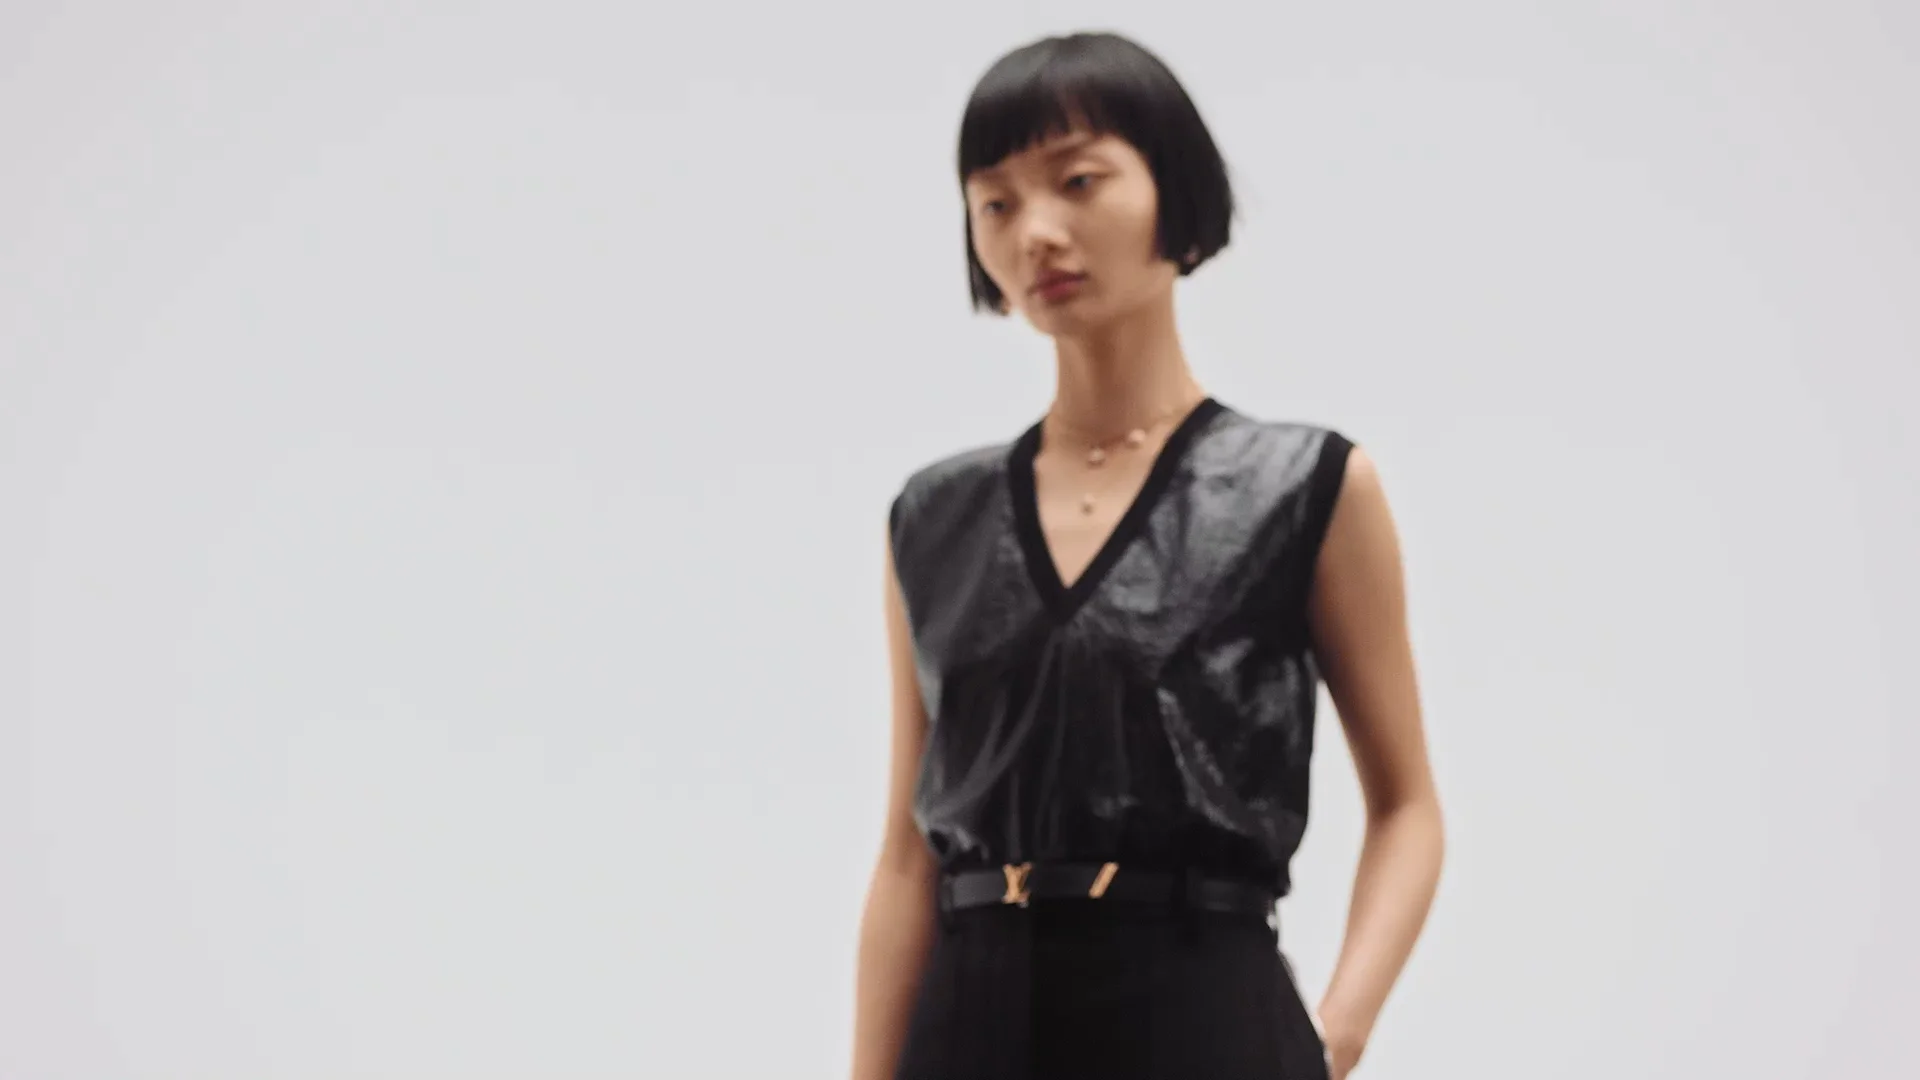 Louis Vuitton B Blossom Collection - Interview on Vimeo